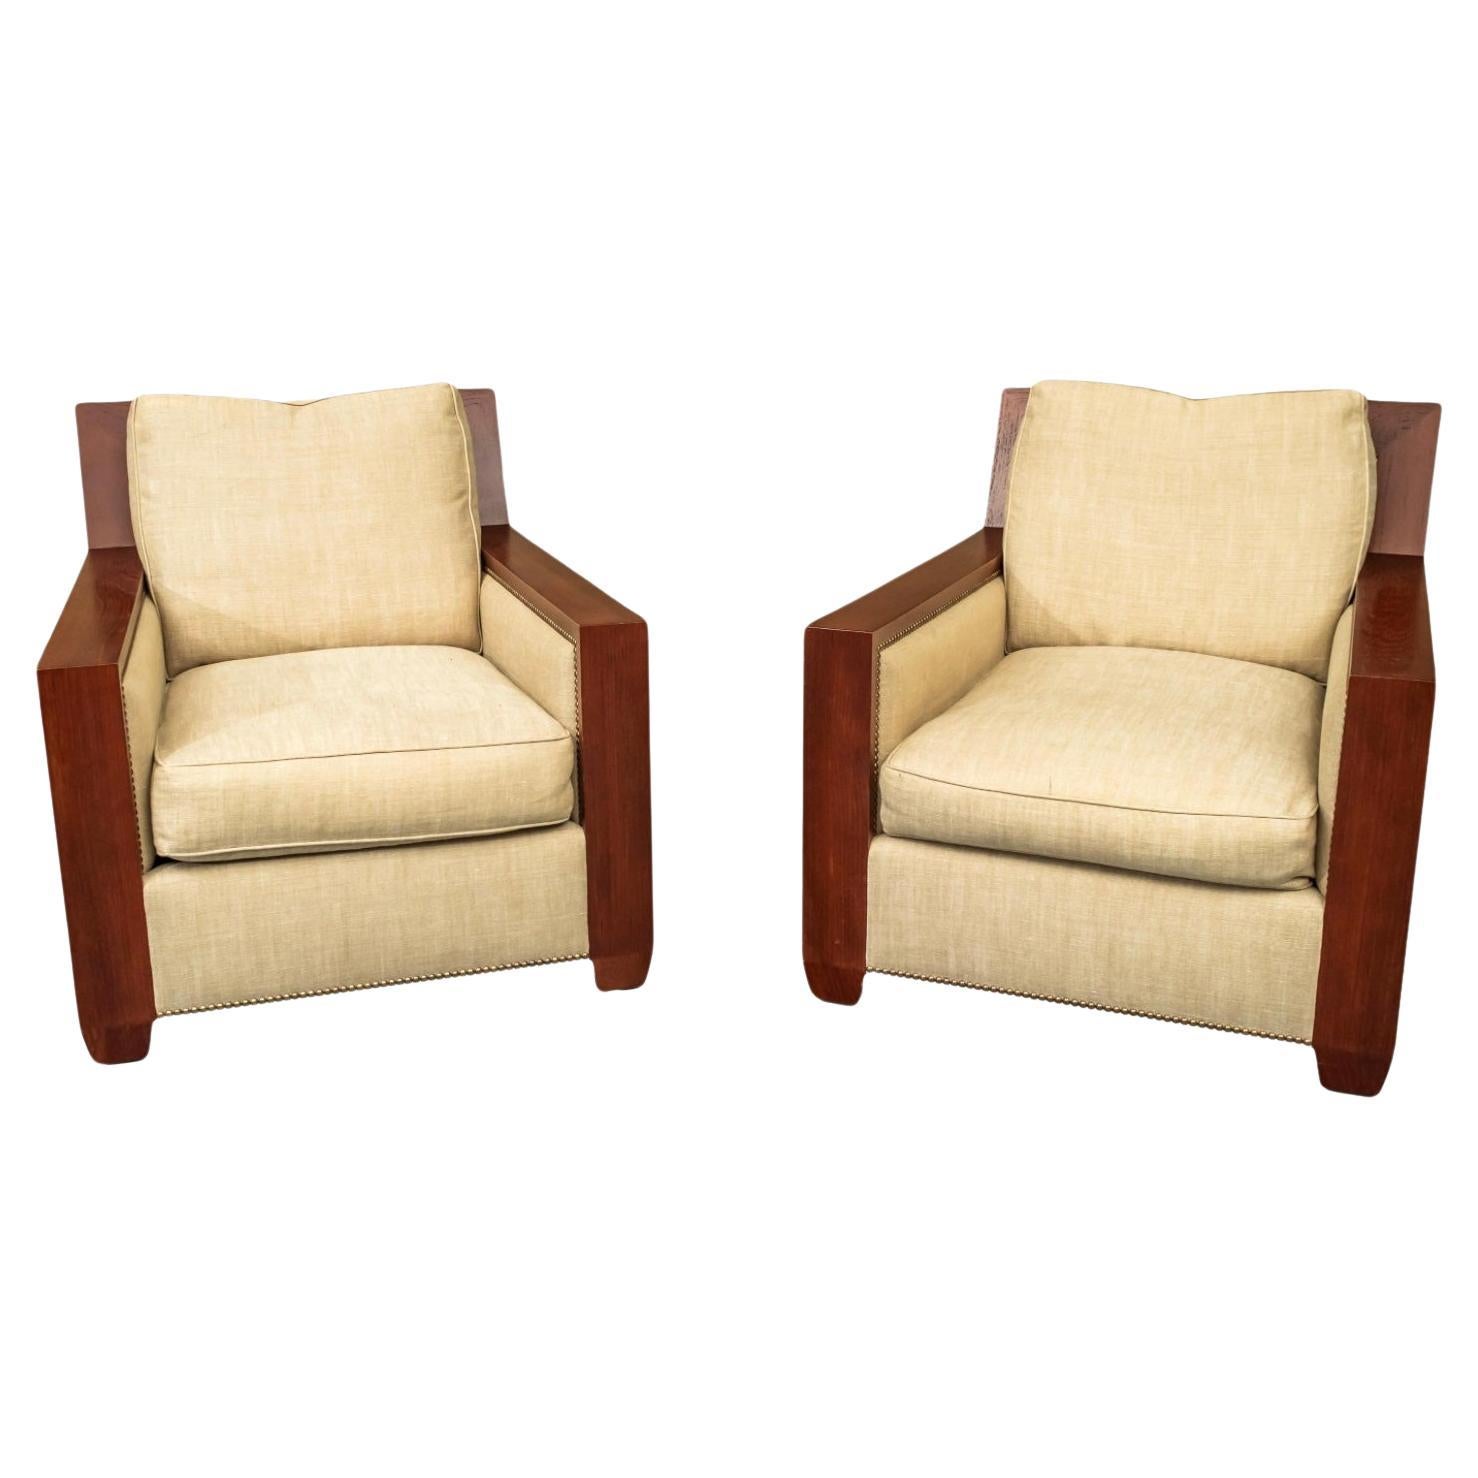 Pair Of Lounge Chairs Designed By John Hutton For Sutherland